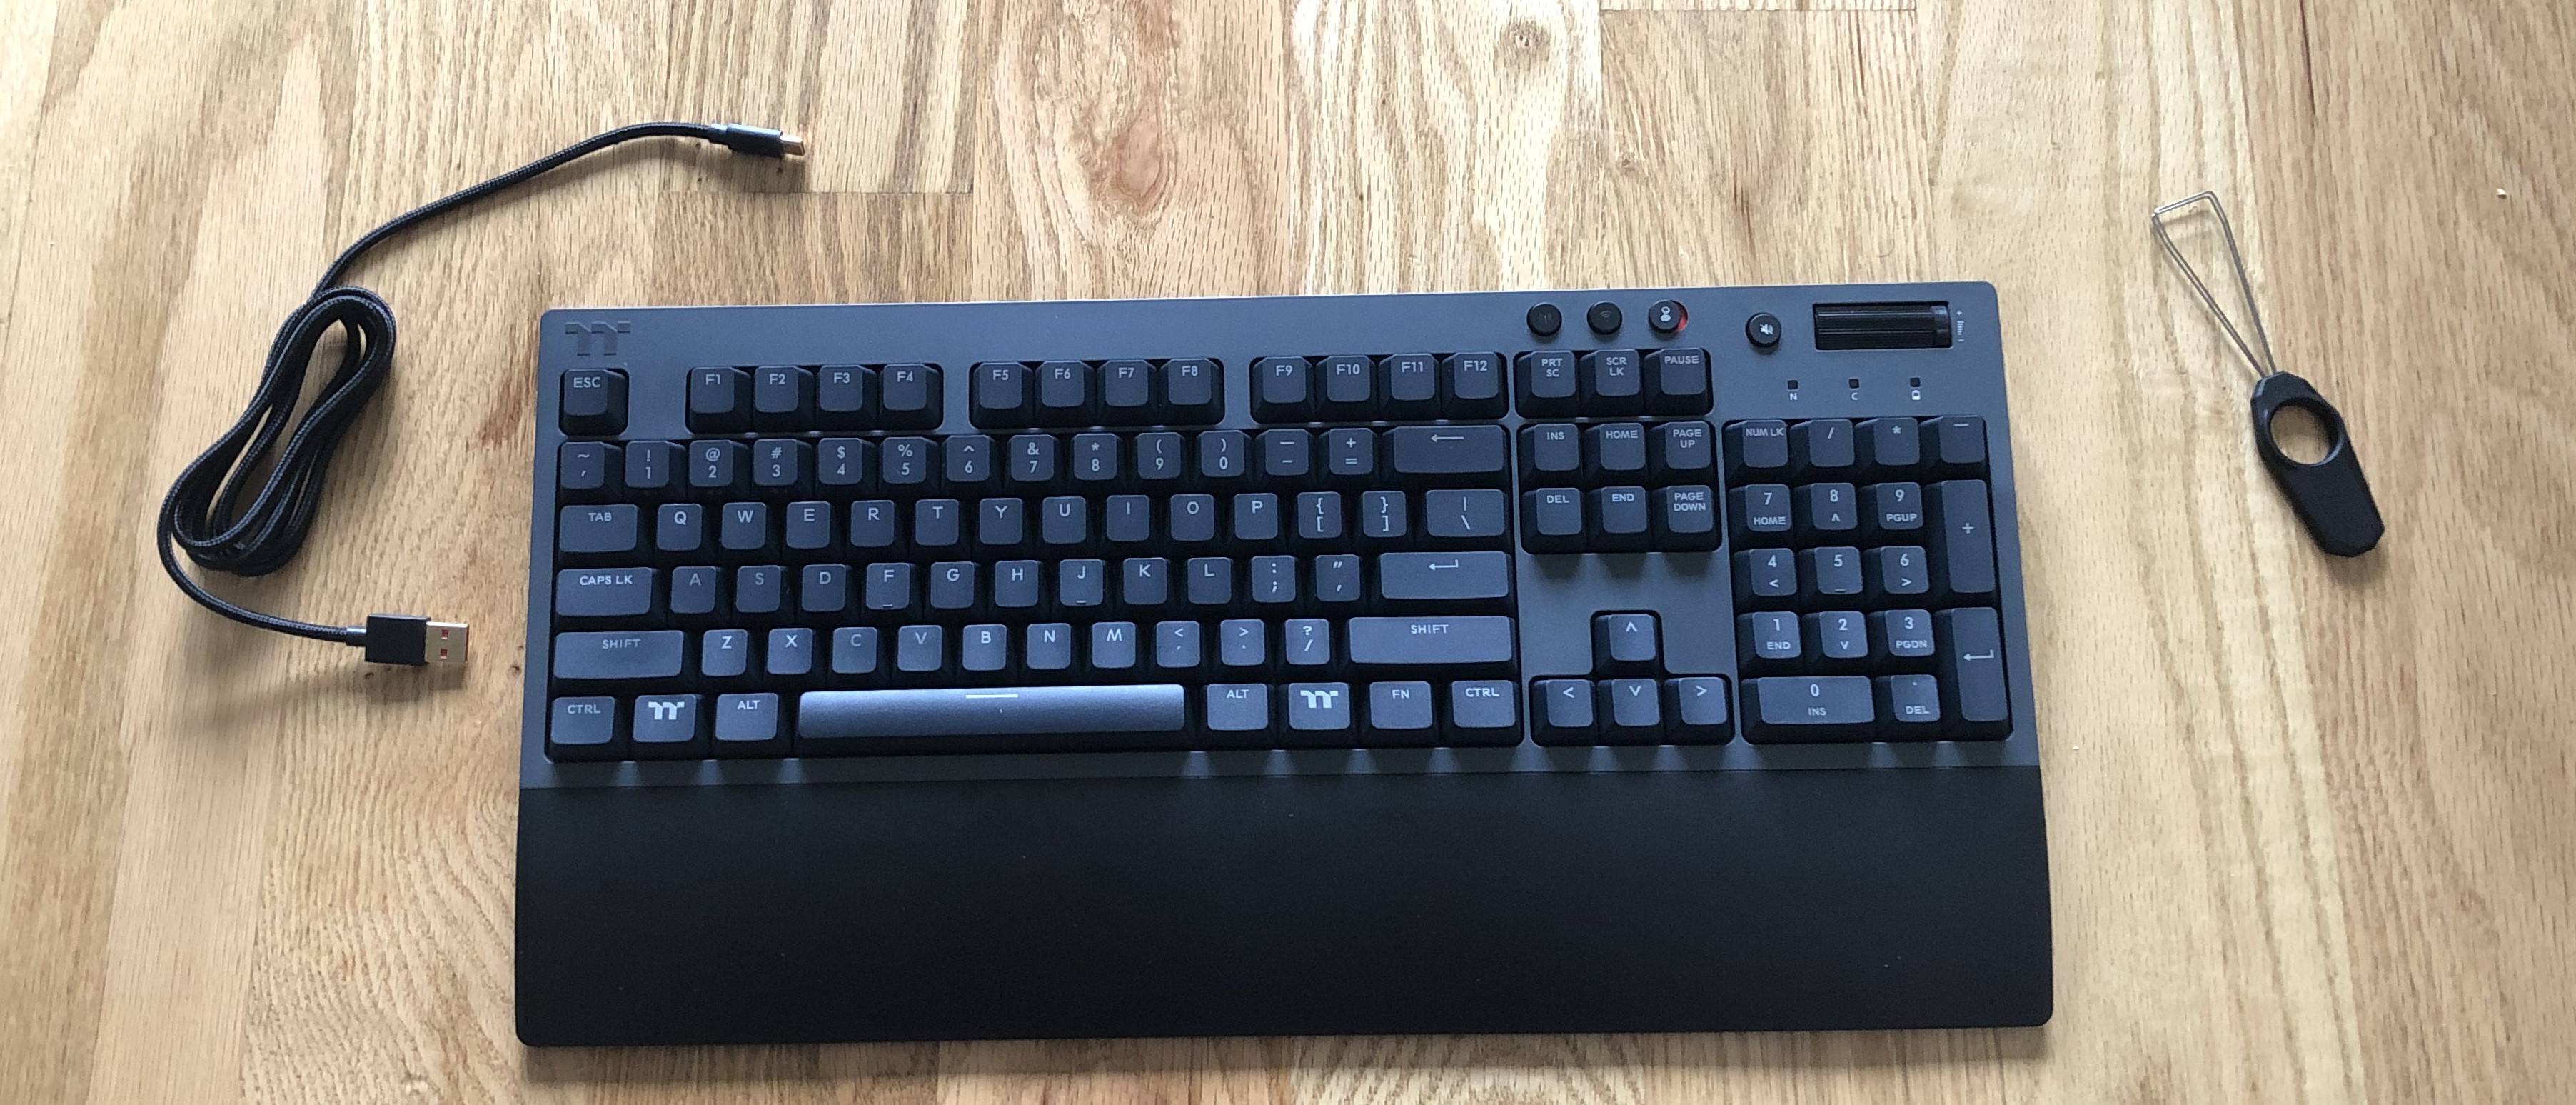 Thermaltake W1 Wireless Mechanical Keyboard Review: Solid Performance, Not Great for Gaming